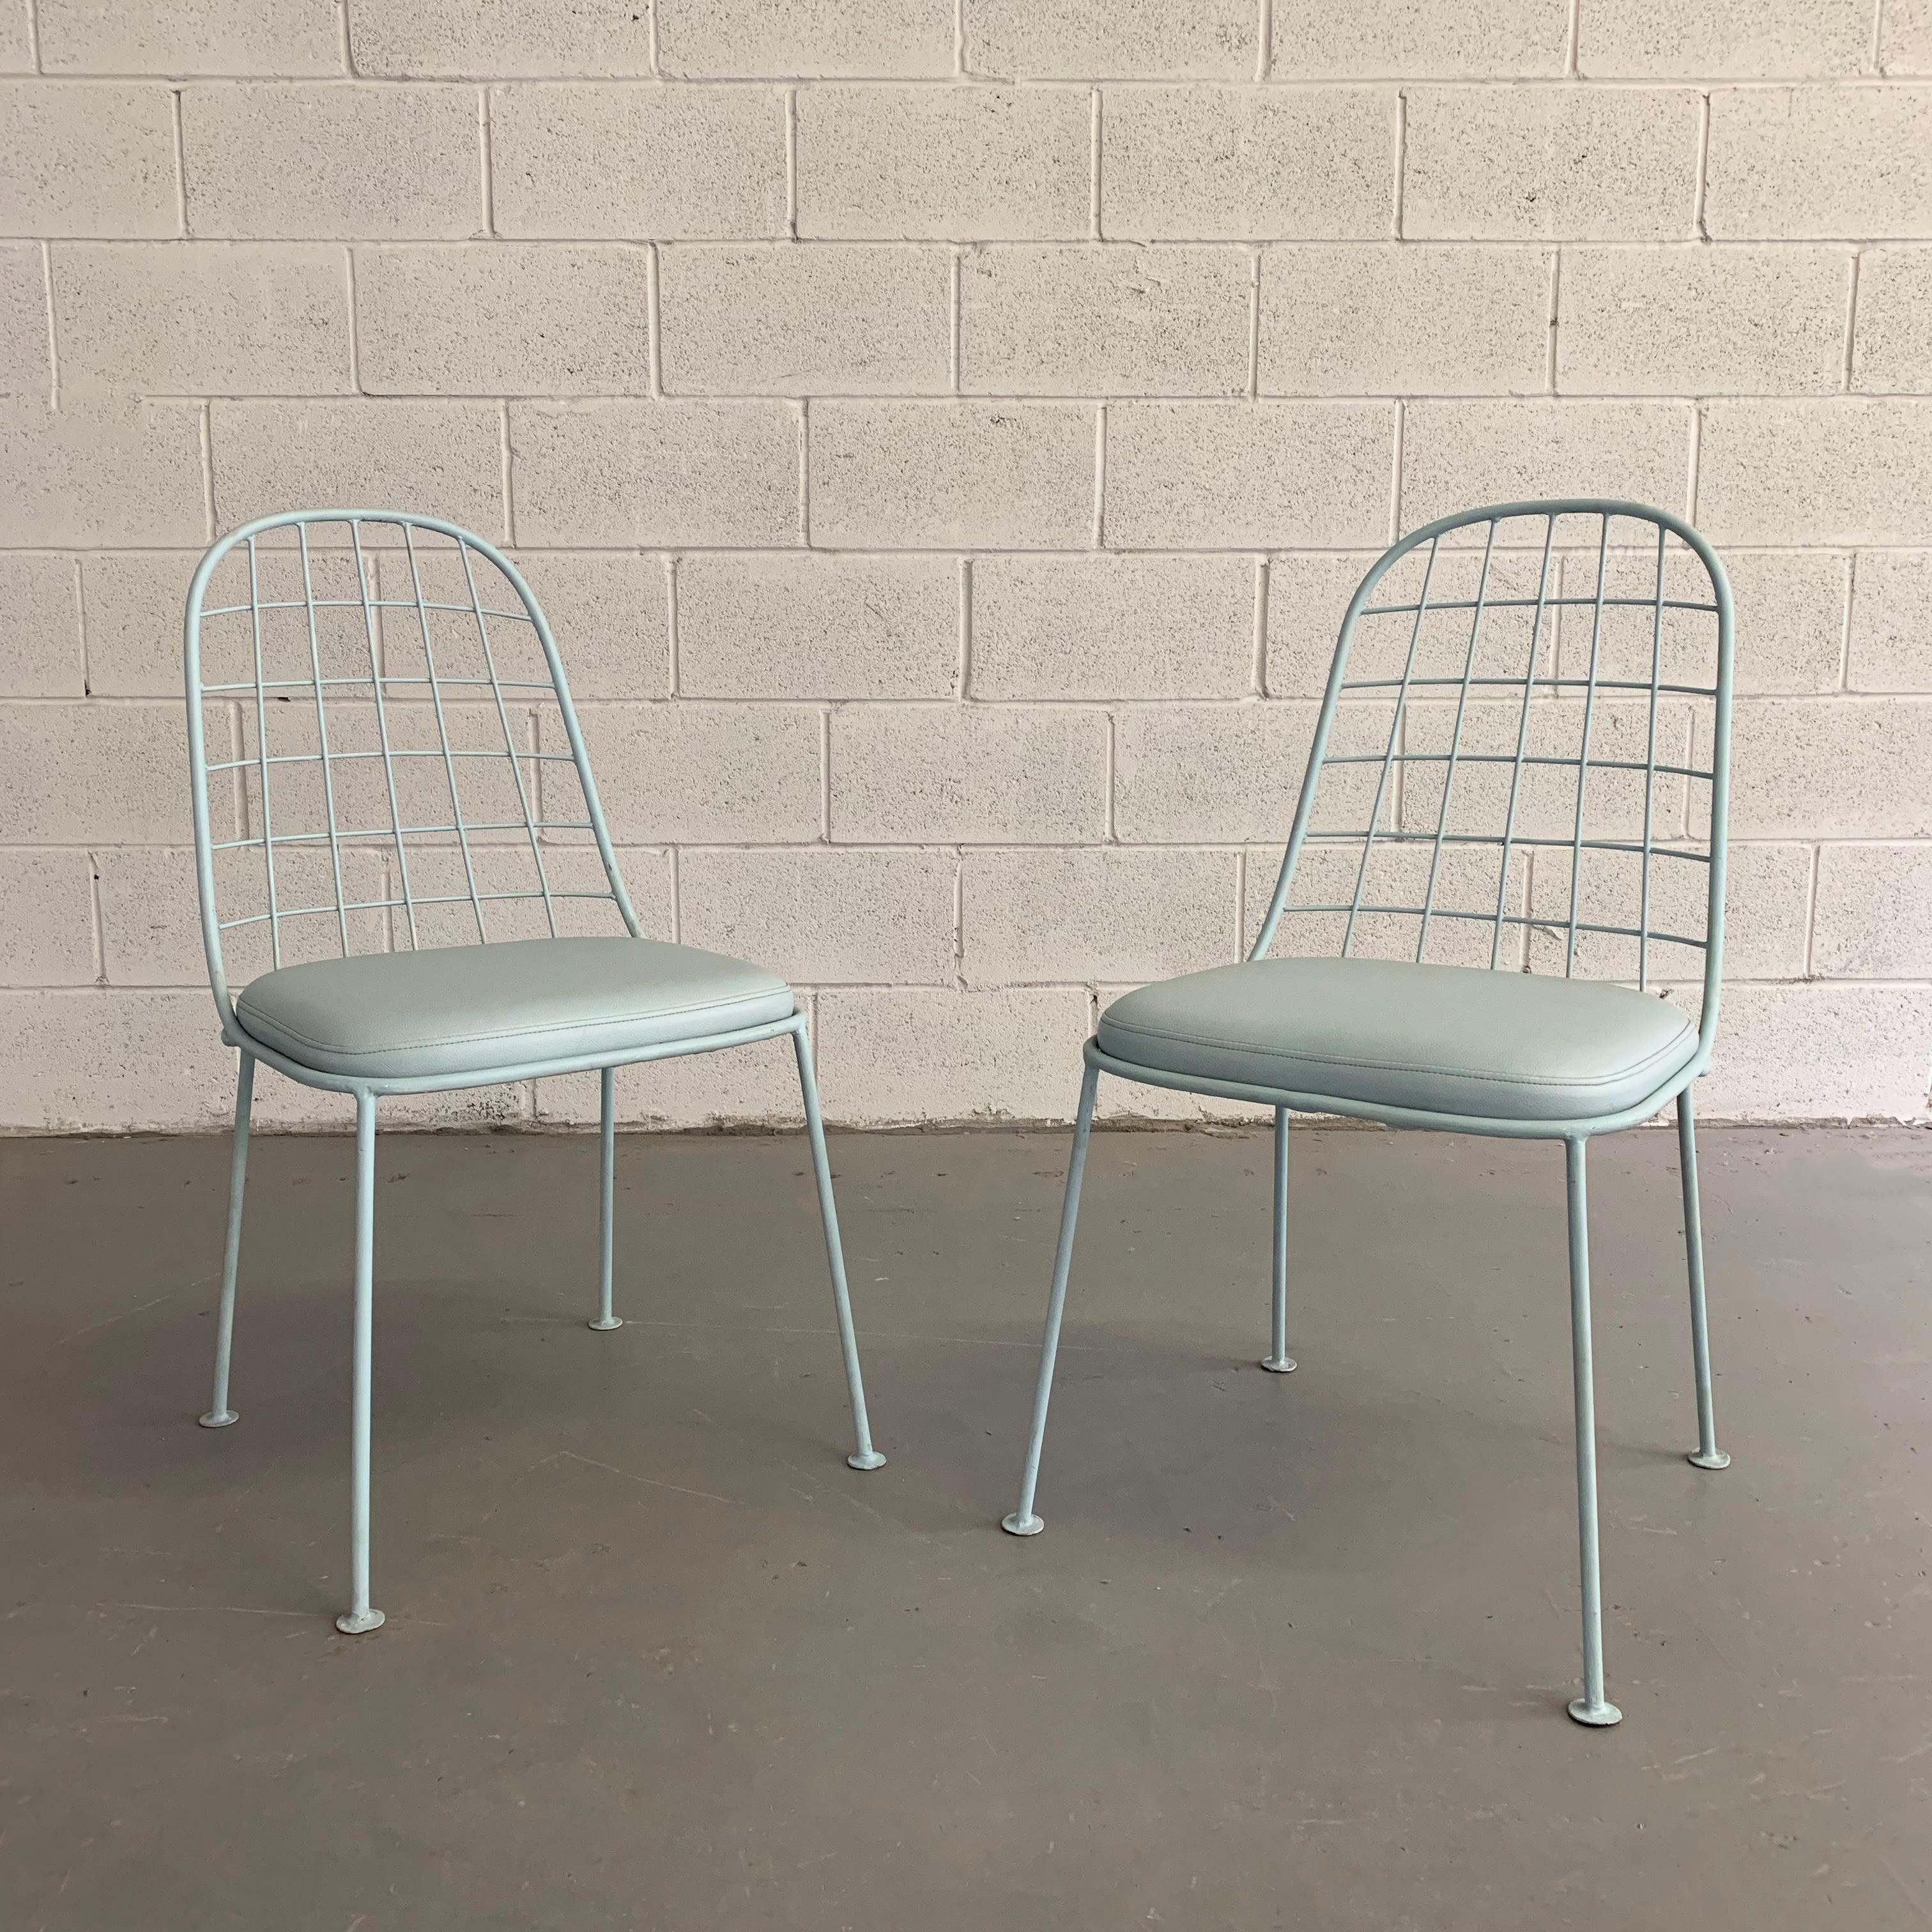 Pair of Mid-Century Modern, outdoor, patio, garden chairs feature painted, wrought iron grid frames with matching vinyl upholstered cushions.